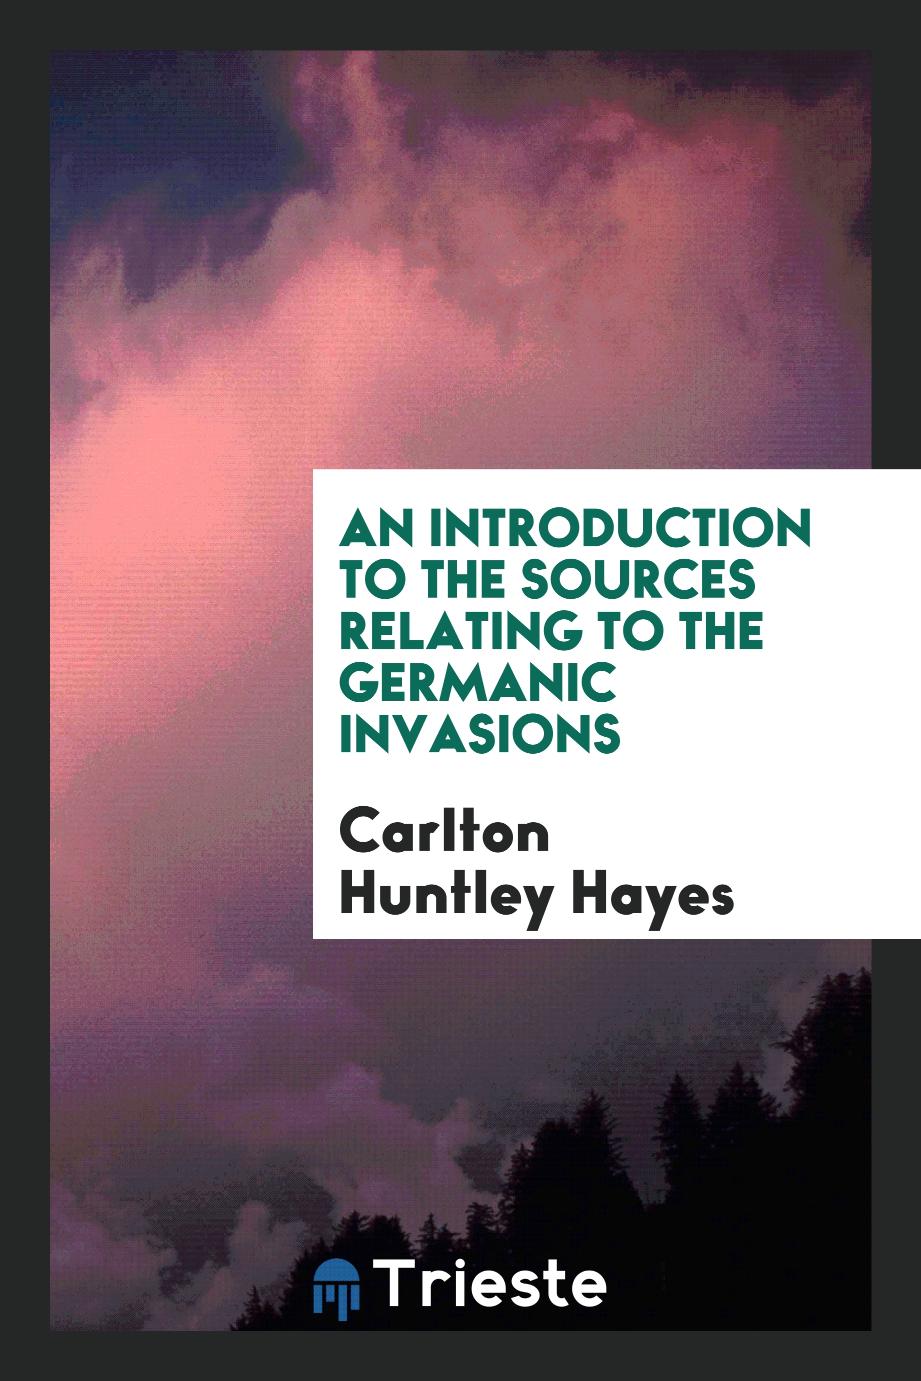 An introduction to the sources relating to the Germanic invasions